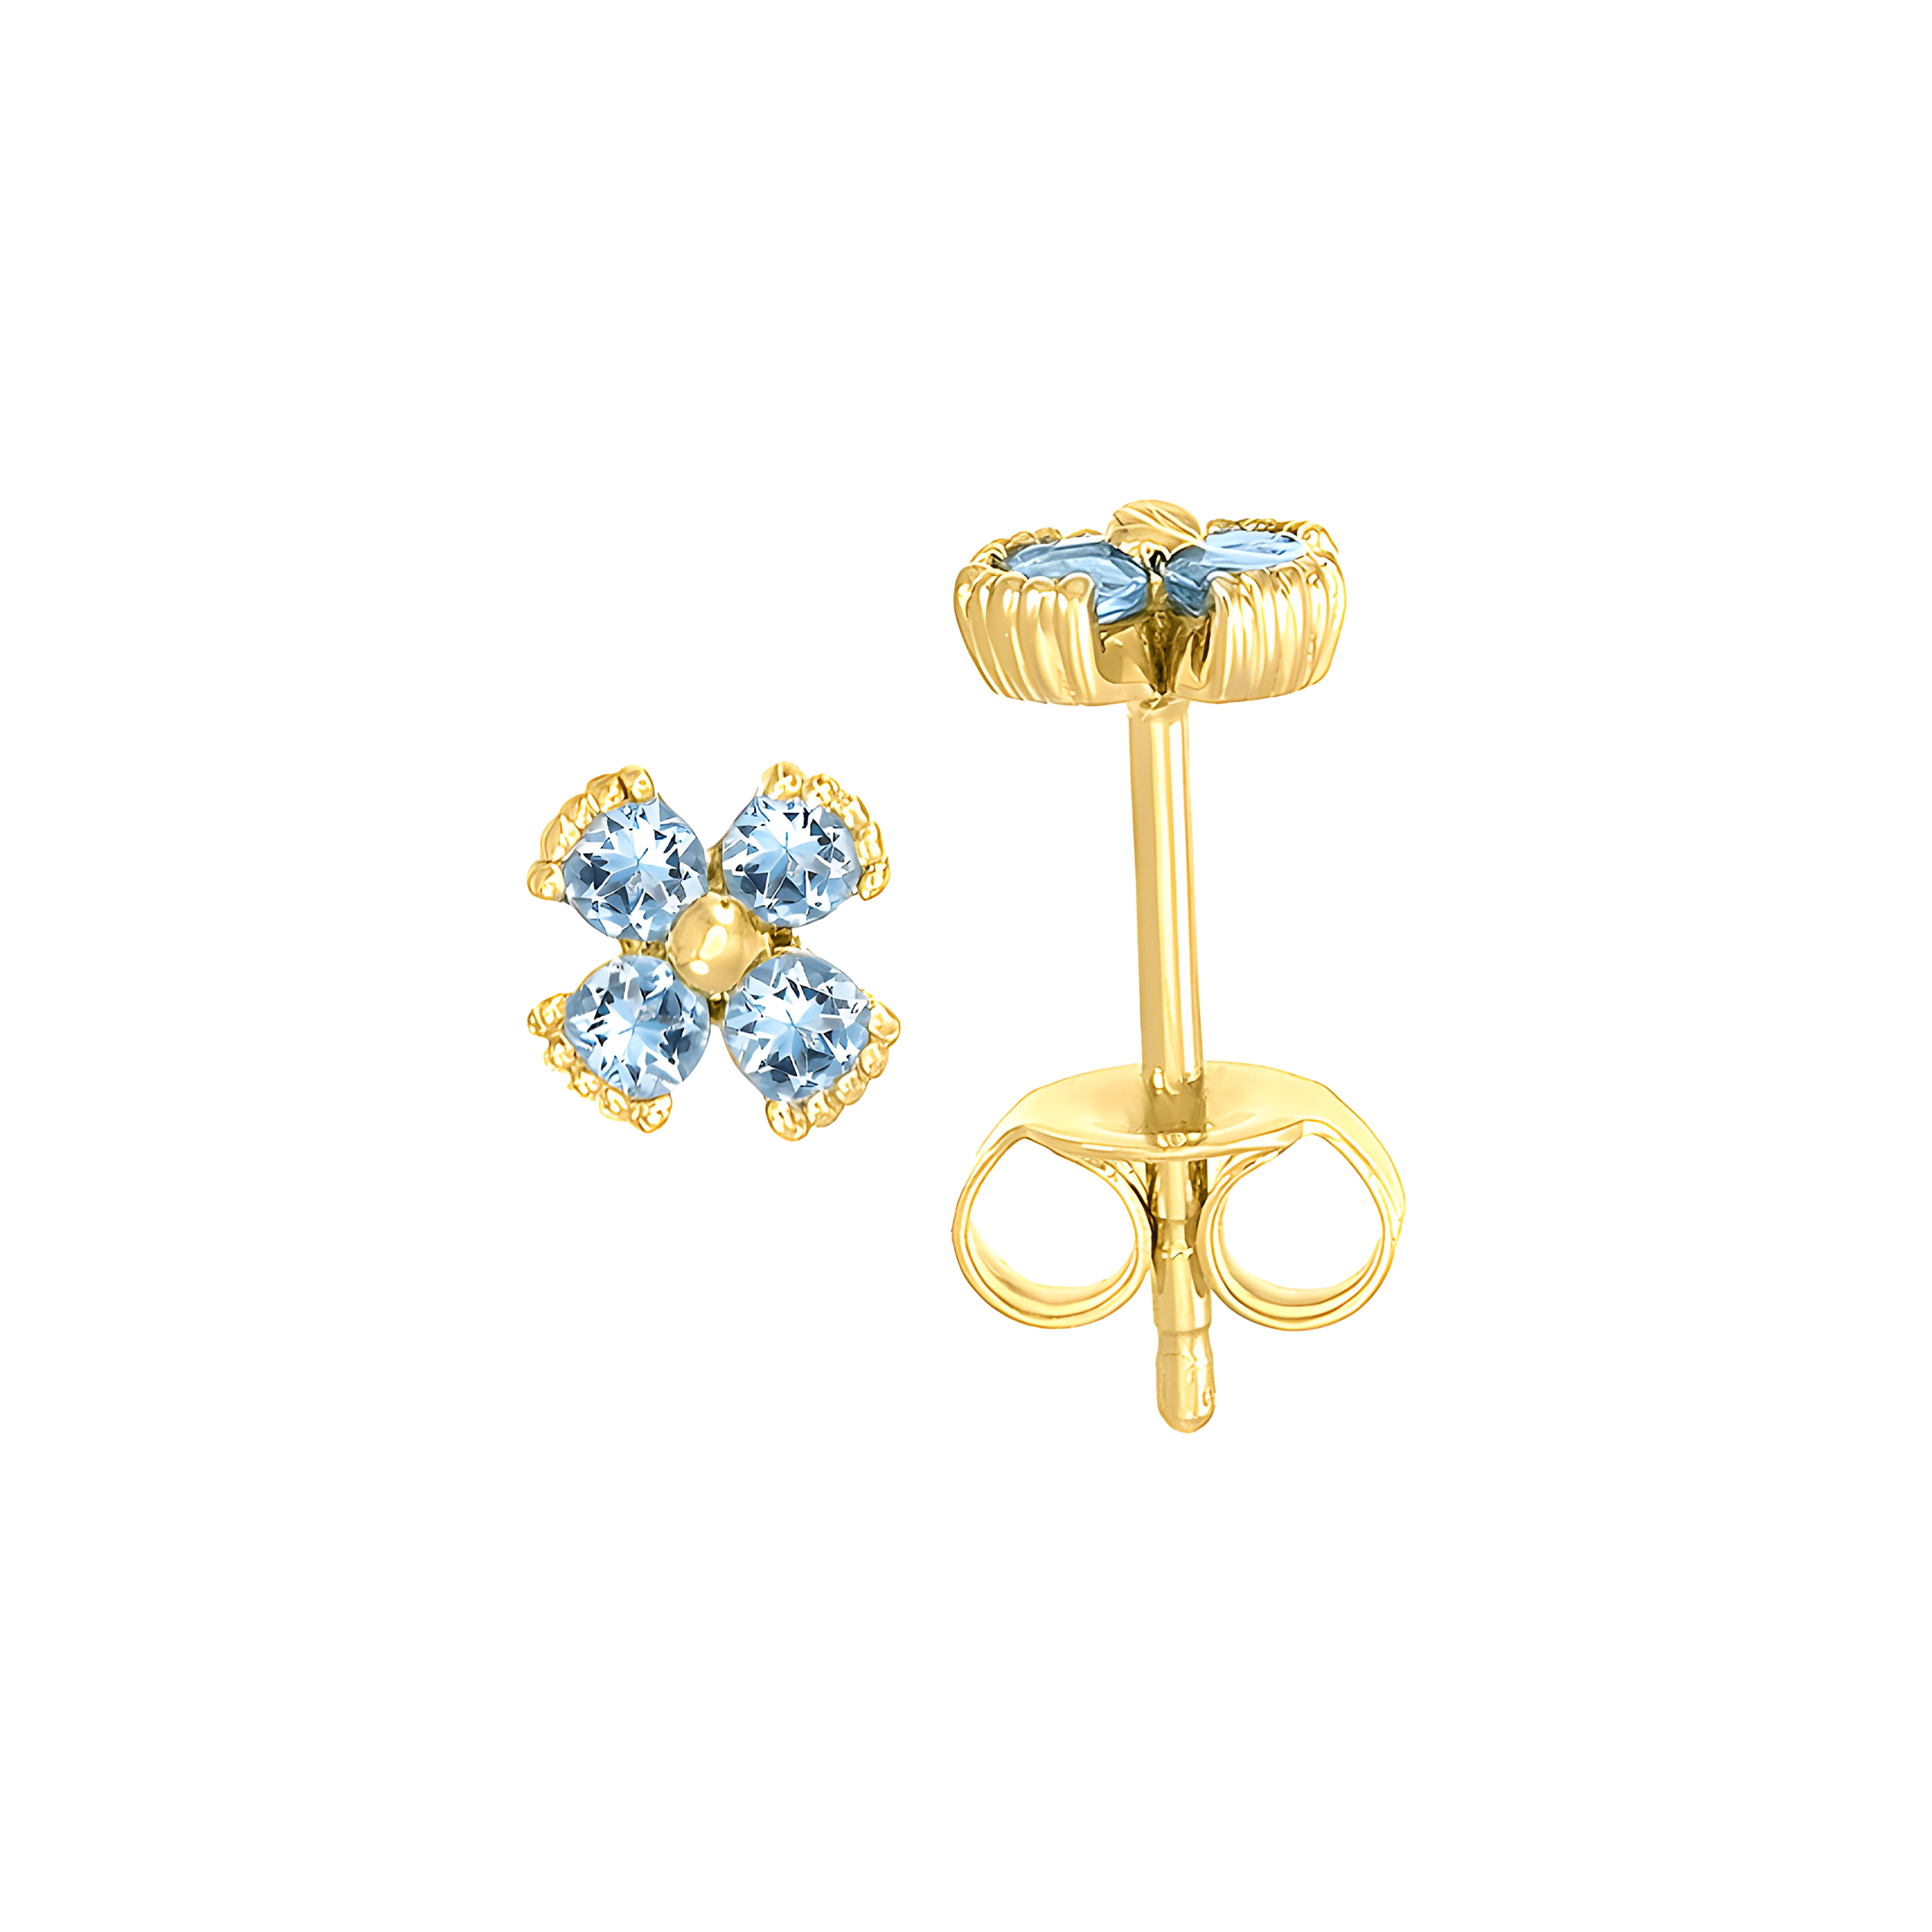 Dainty Floral Aquamarine Stud Earrings in 18k Yellow Gold